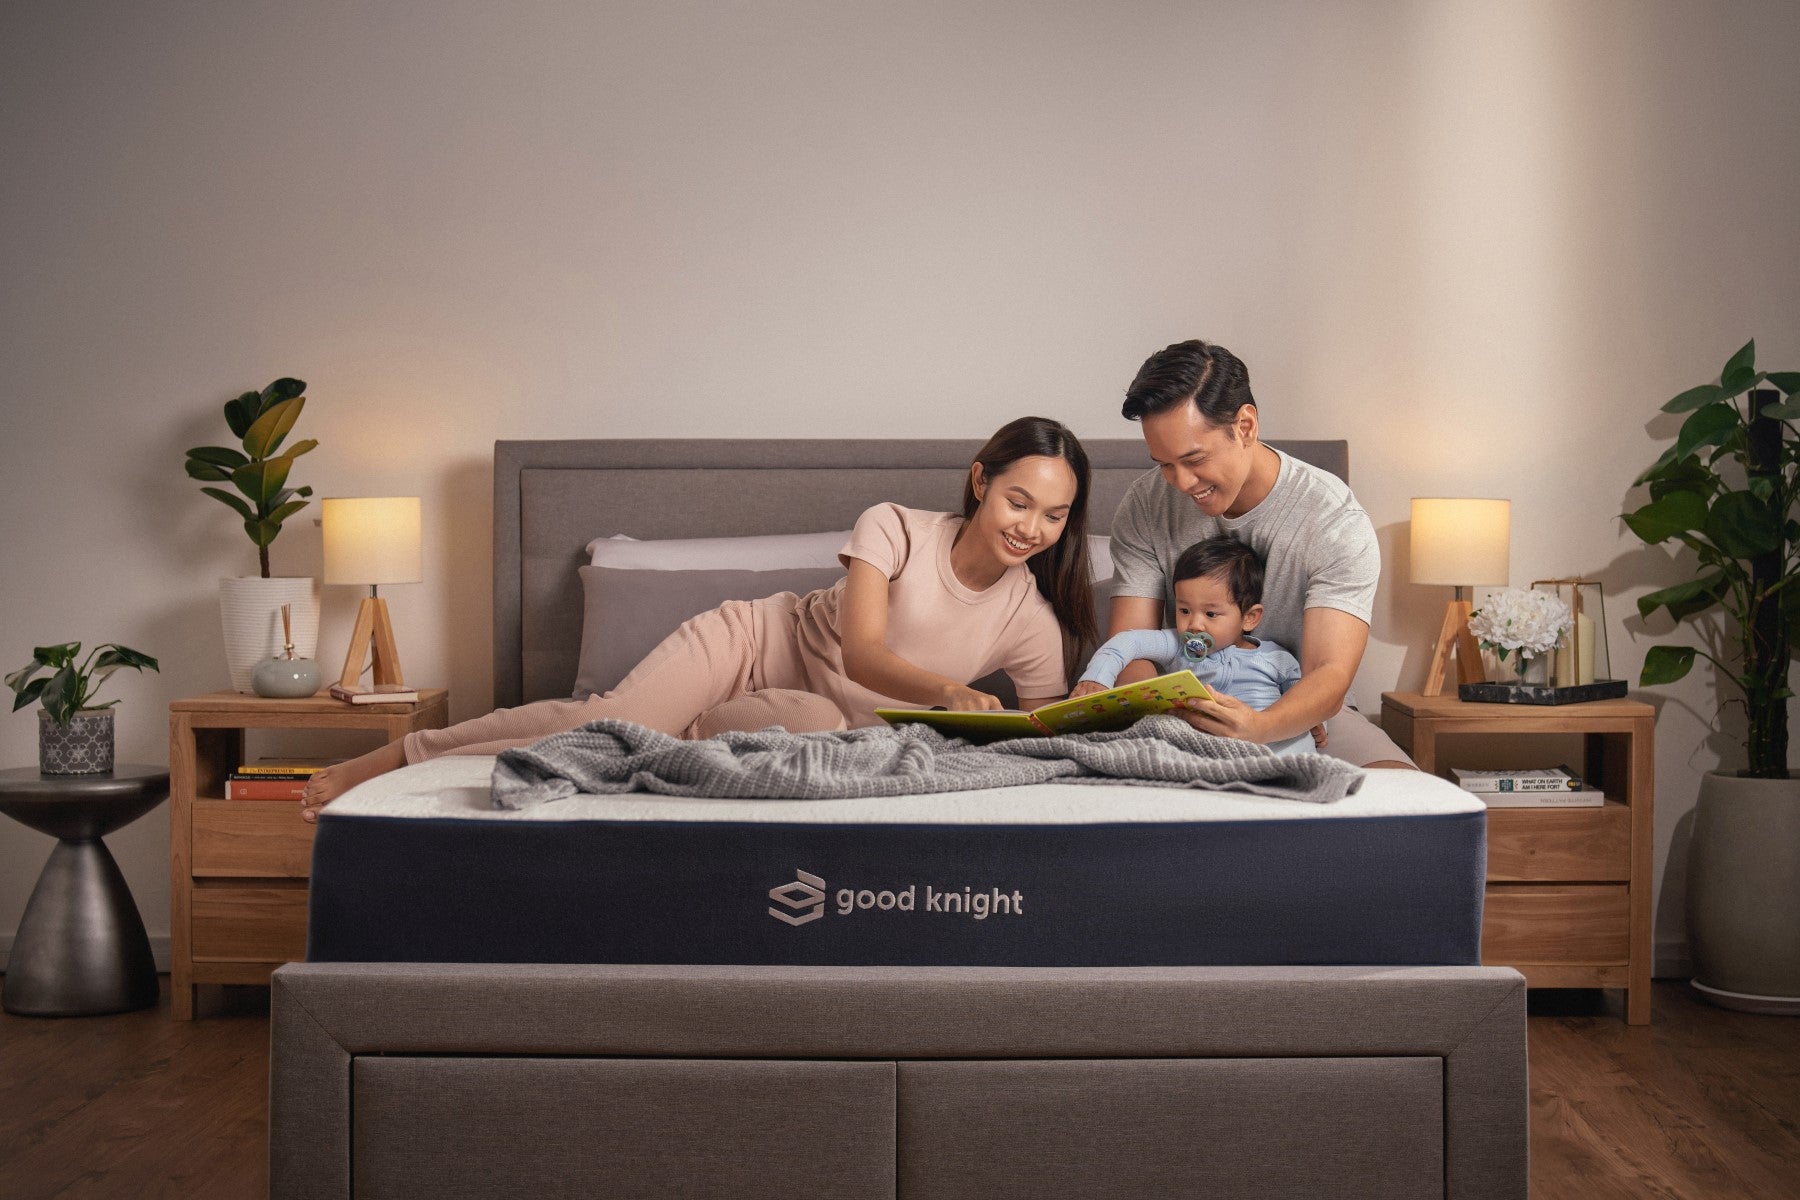 Happy family moment on a Good Knight mattress: A smiling family of three, including both parents and their little toddler, reading a bedtime story book, enjoying a moment of comfort and togetherness.